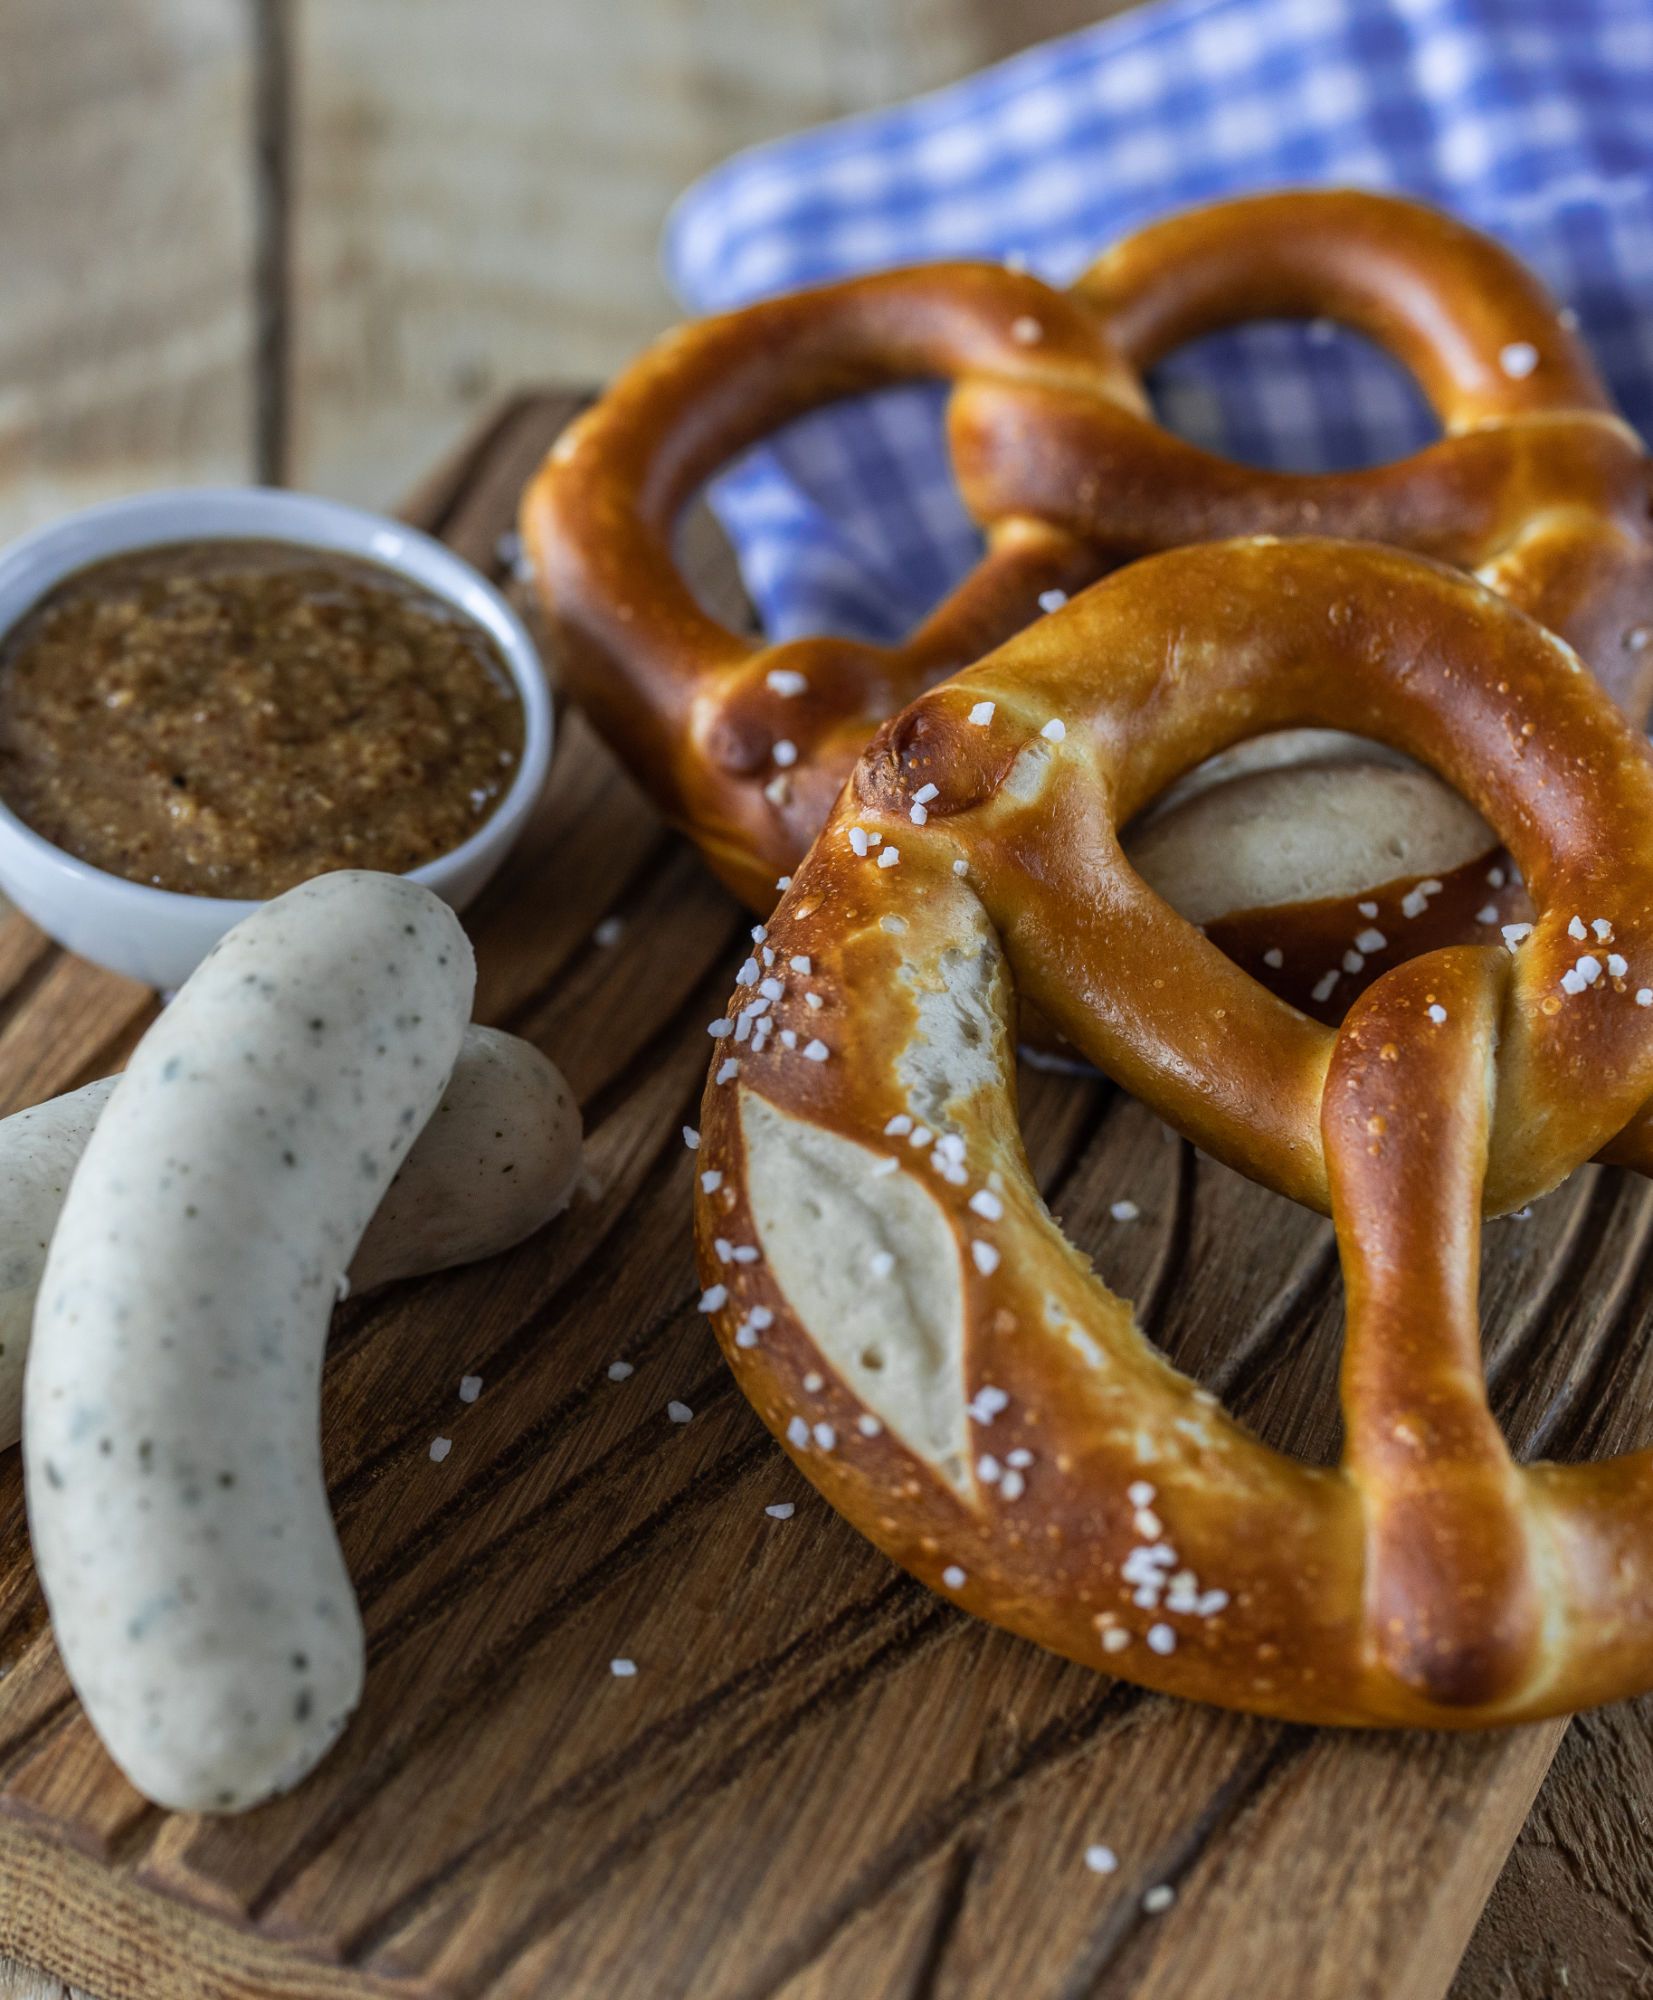 Pretzel with white sausages and sweet mustard